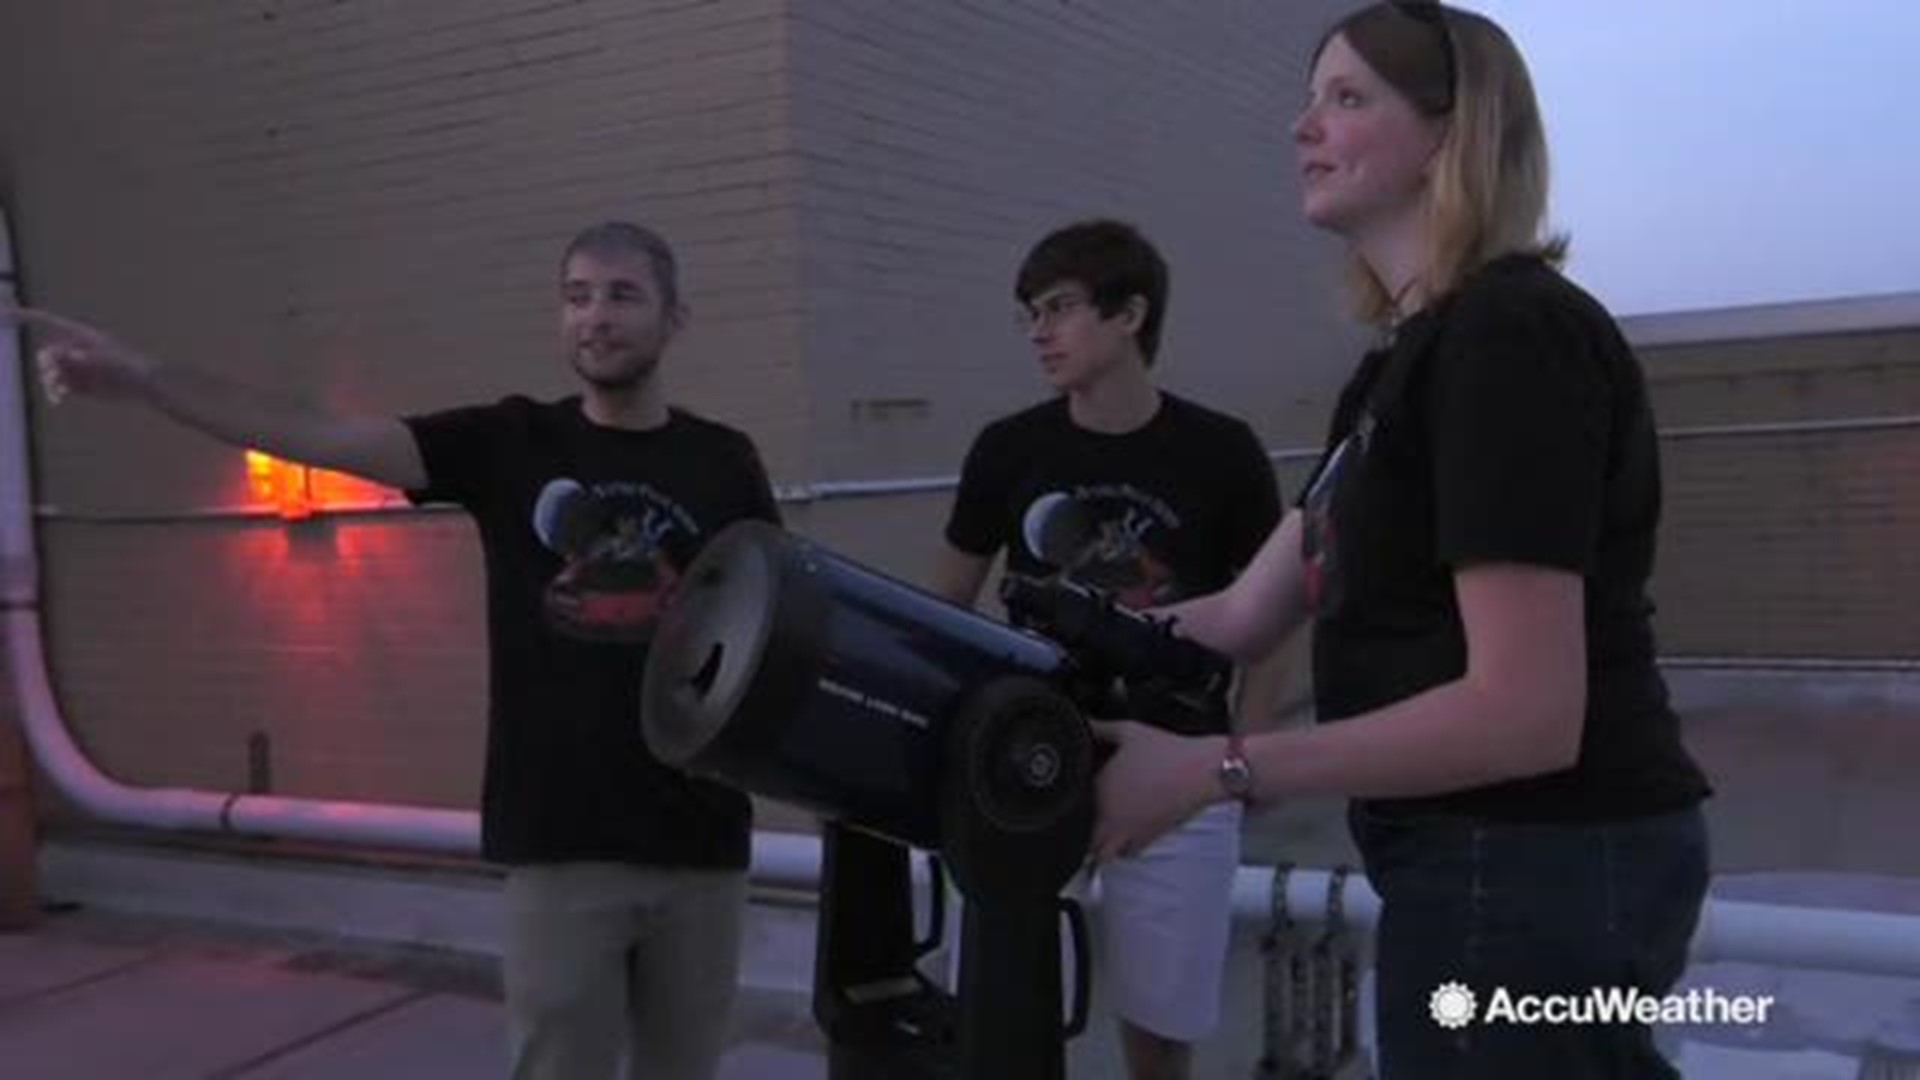 Penn State's Department of Astronomy and Astrophysics has just recently concluded their 20th annual AstroFest program, which went from July 11-14.  AccuWeather visited the event to learn about how their outreach program encourages kids and adults to learn